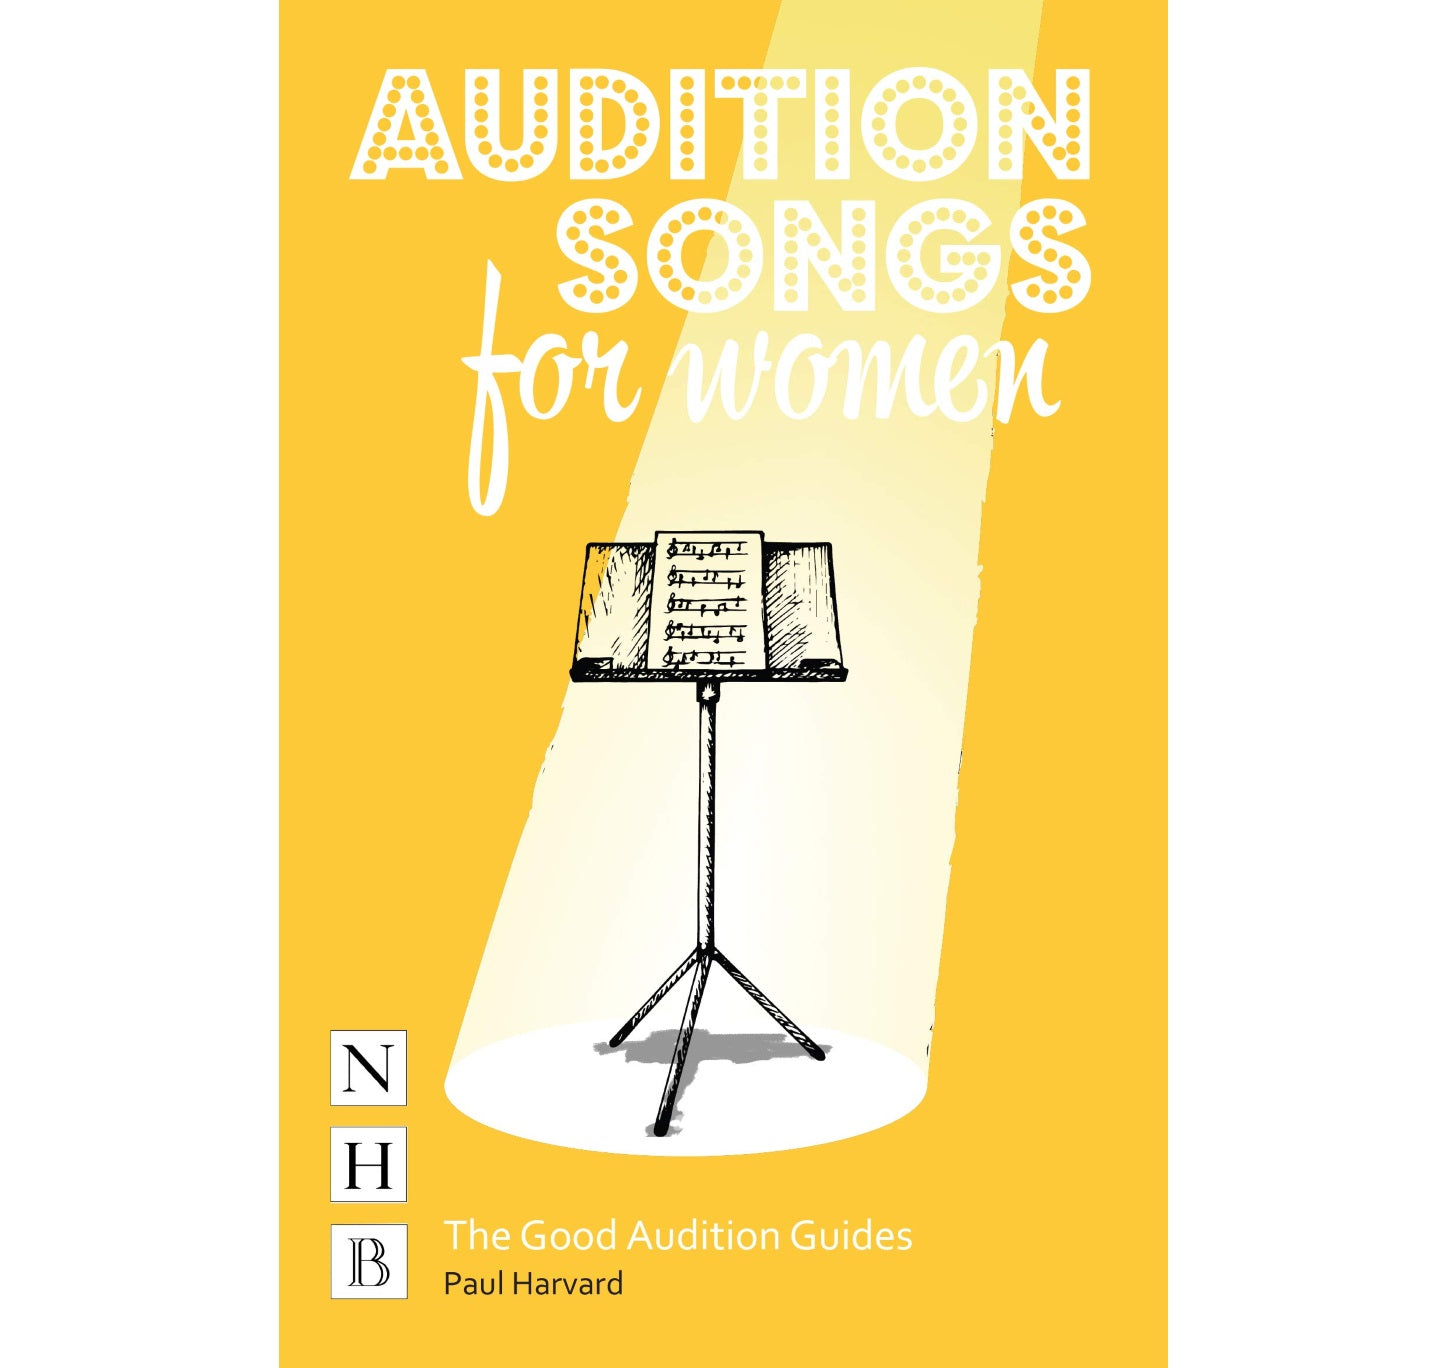 Audition Songs for Women: A Practical Performance Guide PB